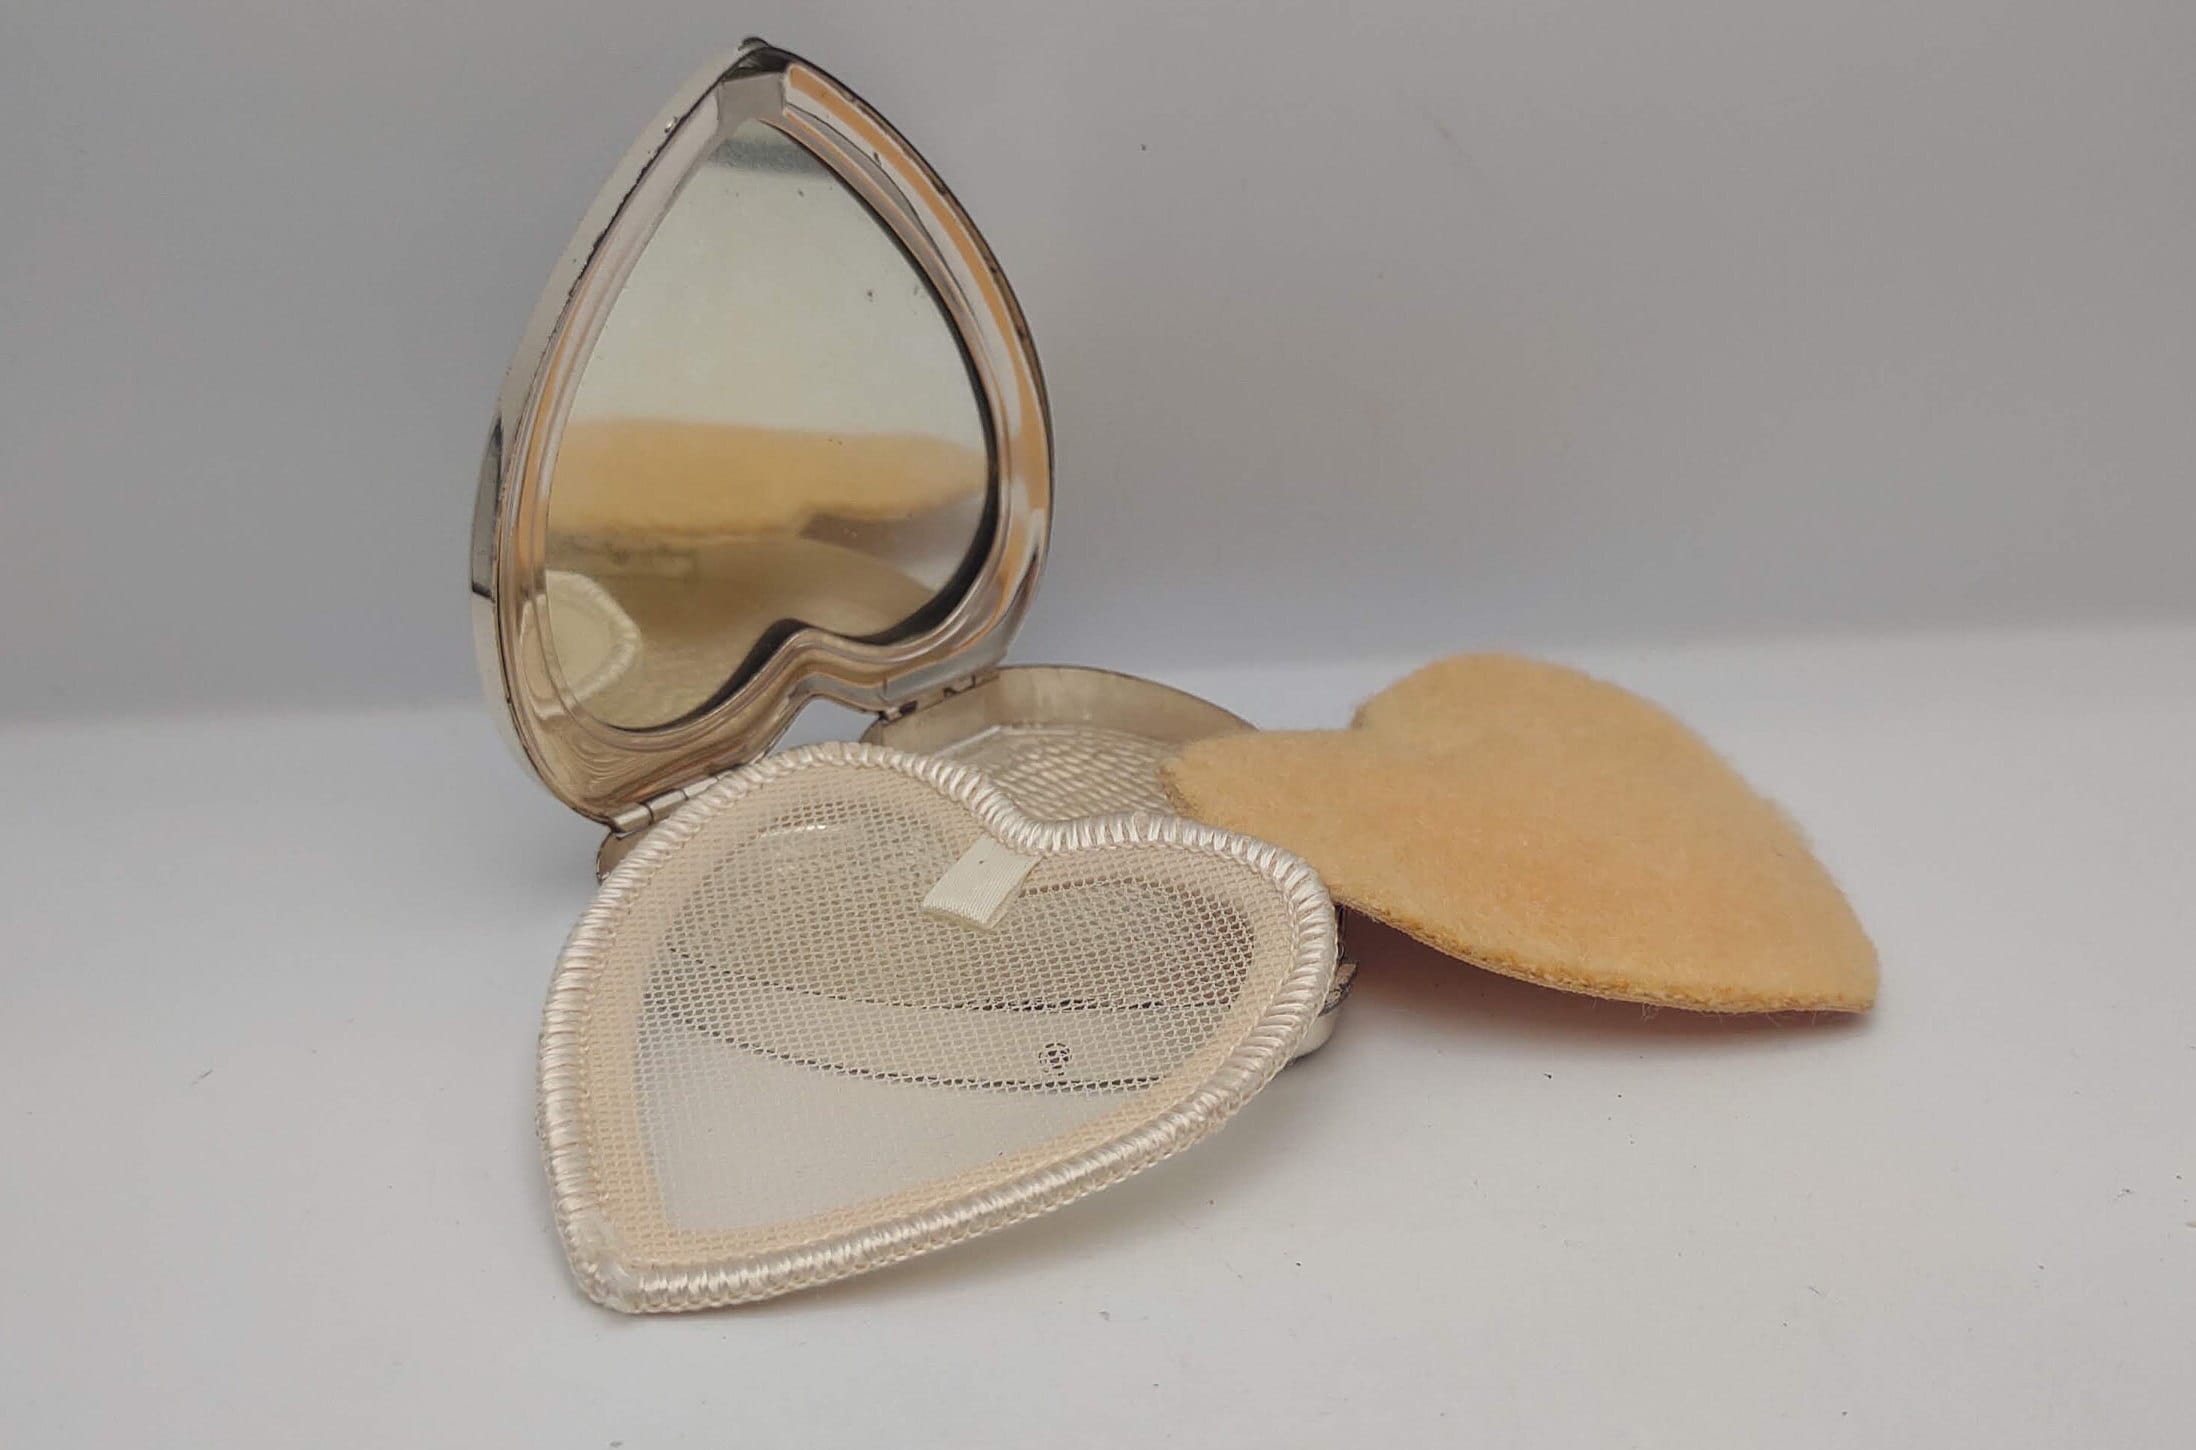 1940s Trio-ette compacts by Platé ❤️ I now have 3 of the 7 shades it w